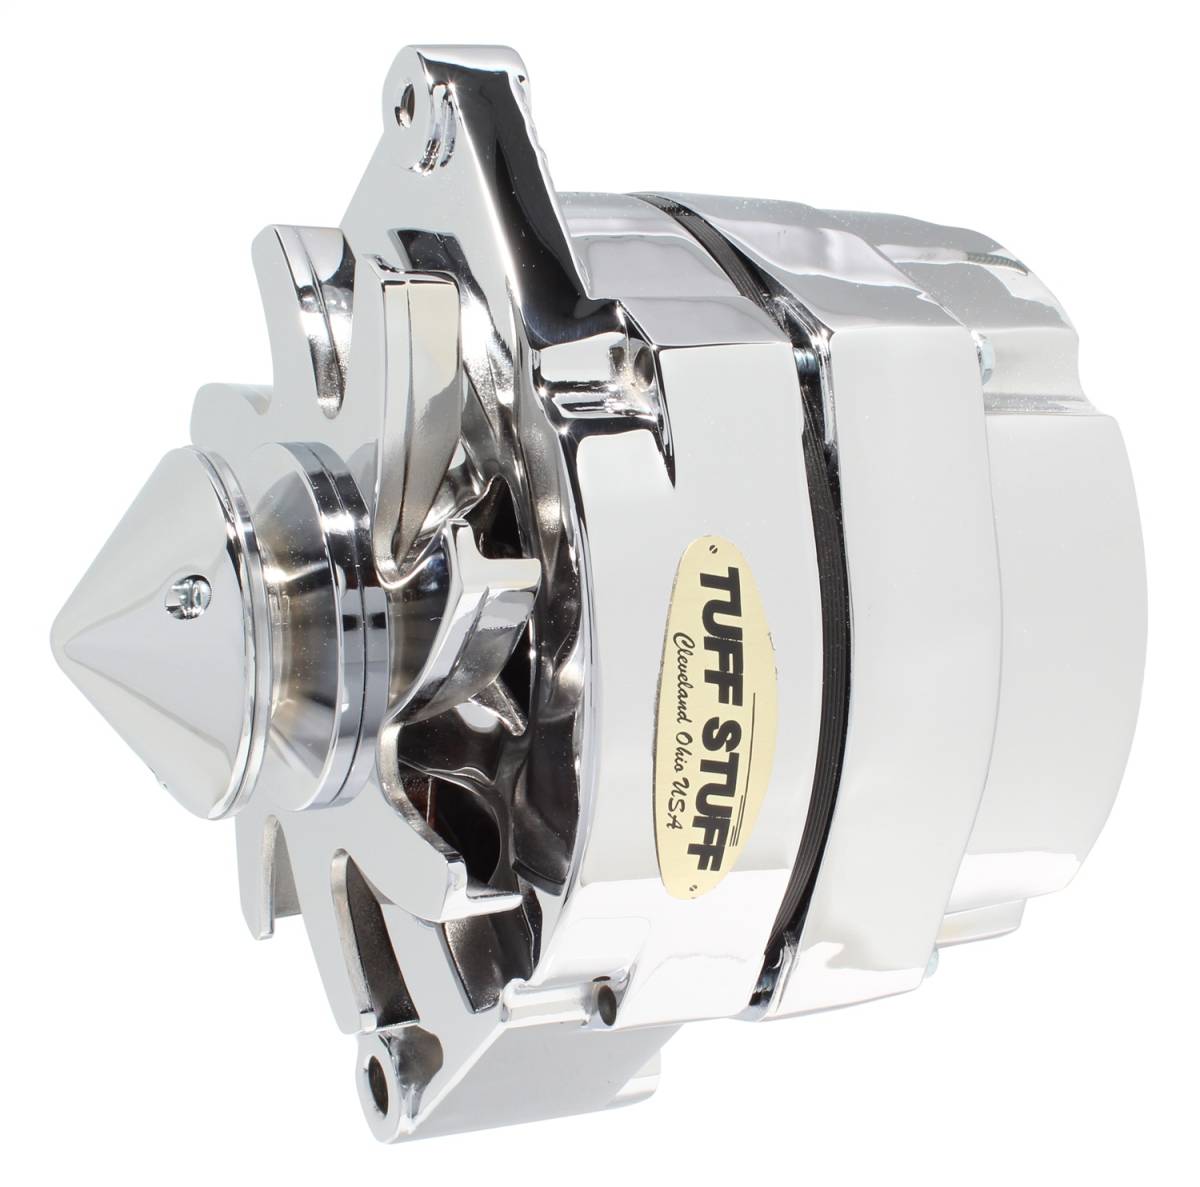 Tuff Stuff Performance - Silver Bullet Alternator 100 AMP OEM Or 1 Wire V Groove Bullet Pulley 4.85 in. Case Depth Lower Mount Boss 2 in. Long Polished 6 Clocking 7139BBULL6